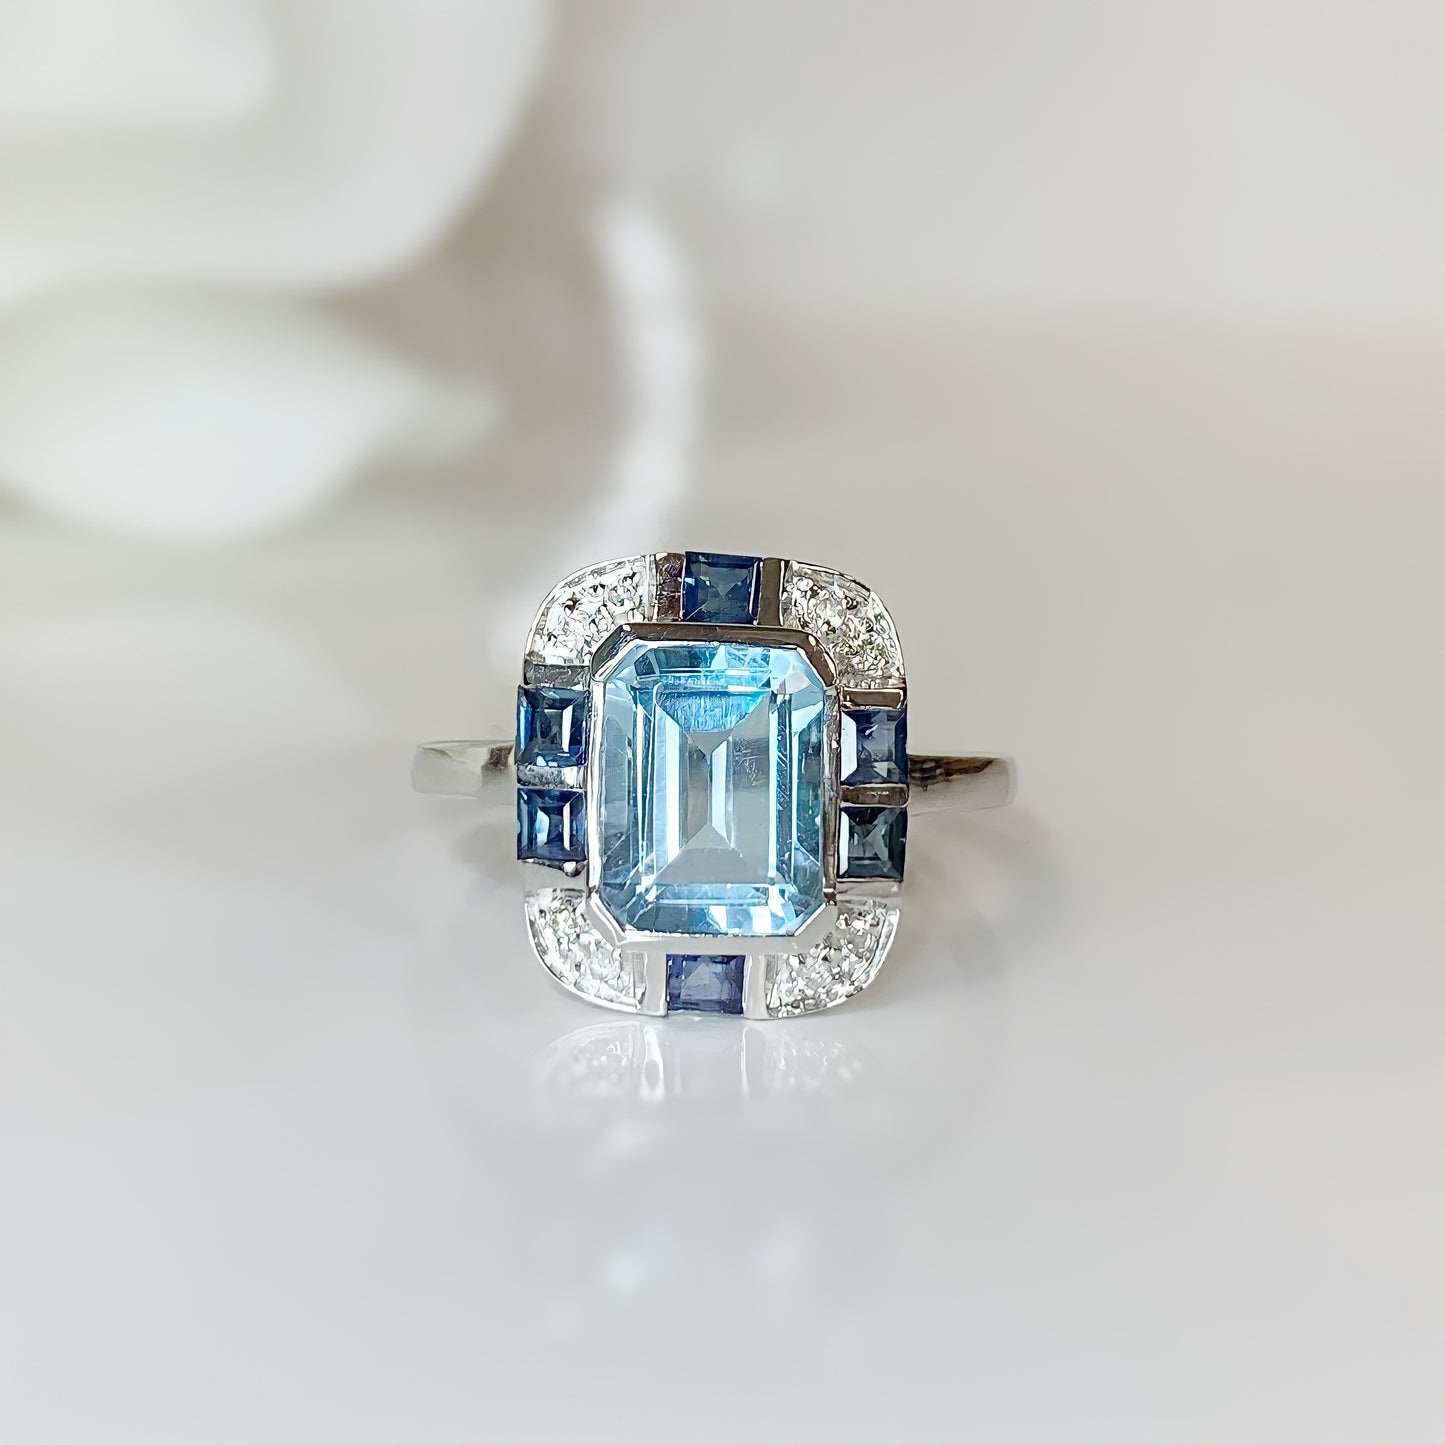 Art Deco Inspired 9ct White Gold Blue Topaz, Sapphire and Diamond Ring – SIZE L1/2